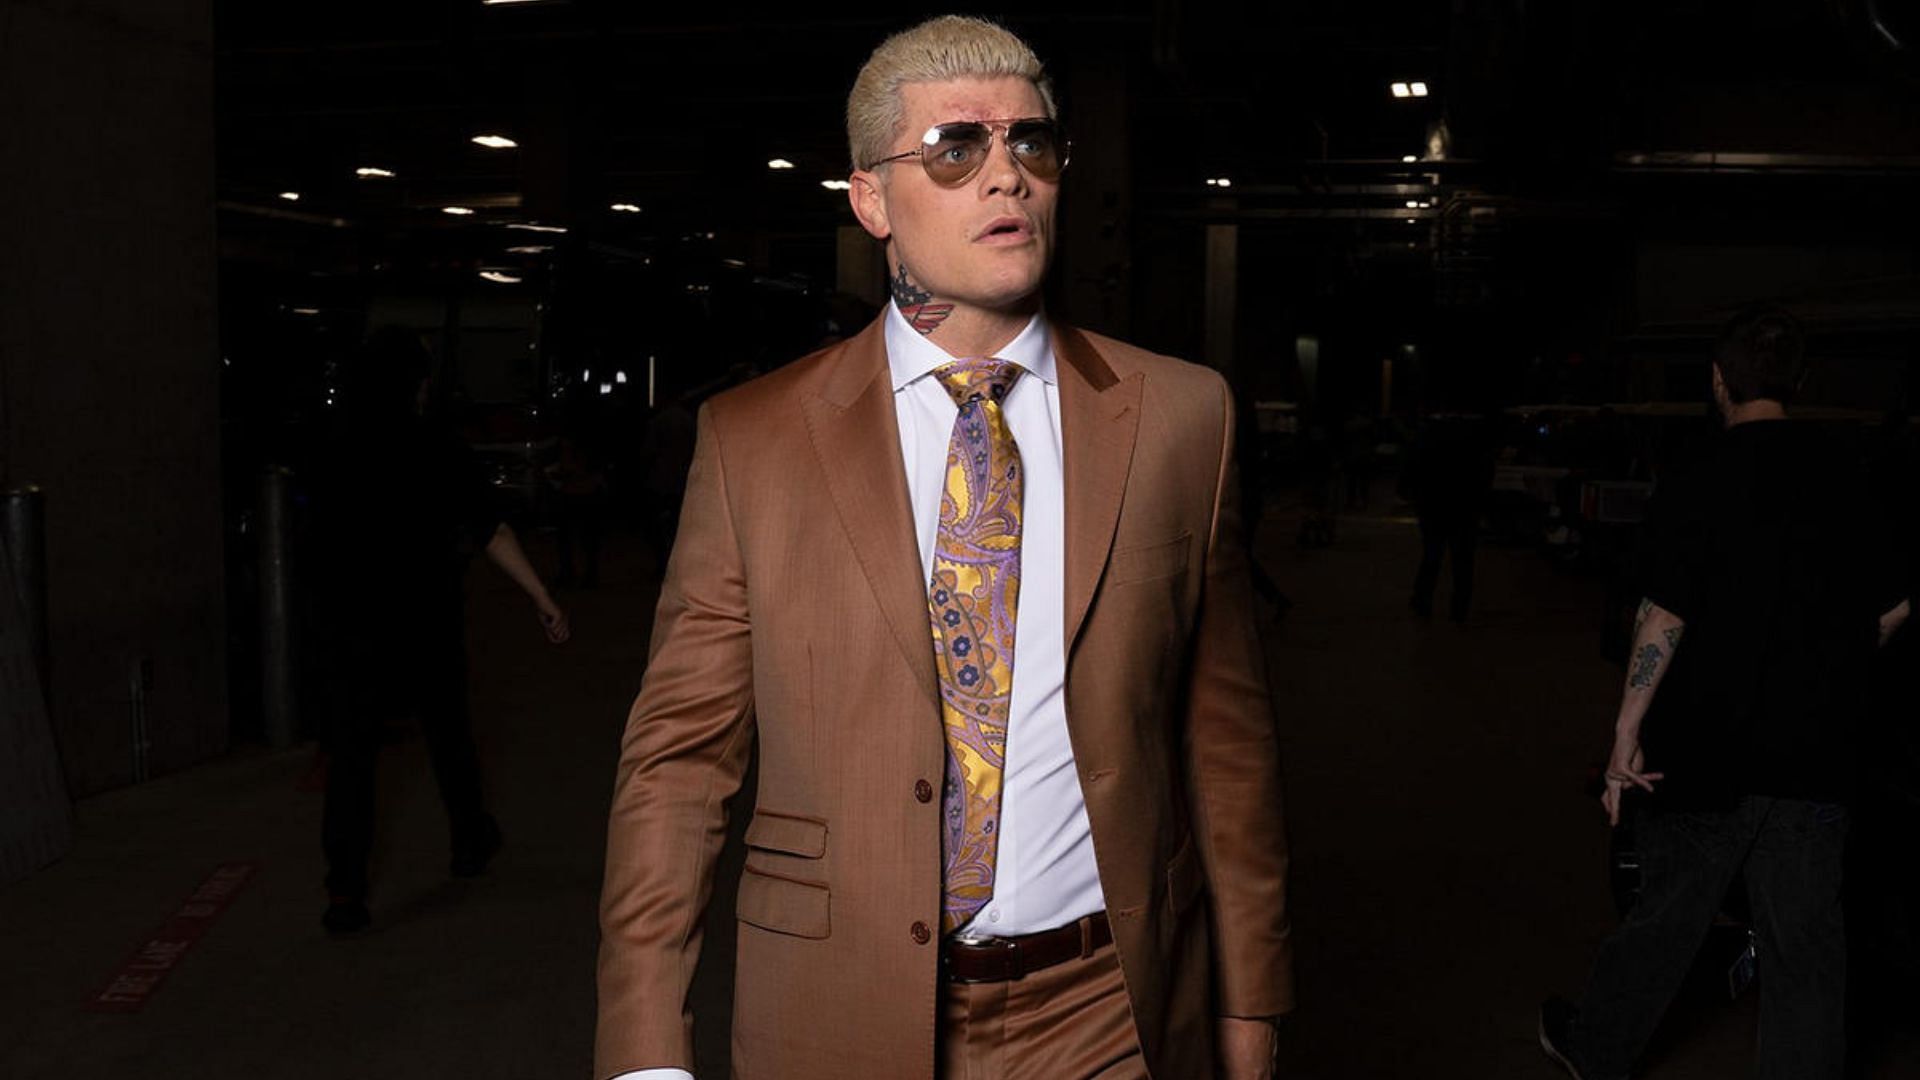 Cody Rhodes recently commented about his run in AEW 